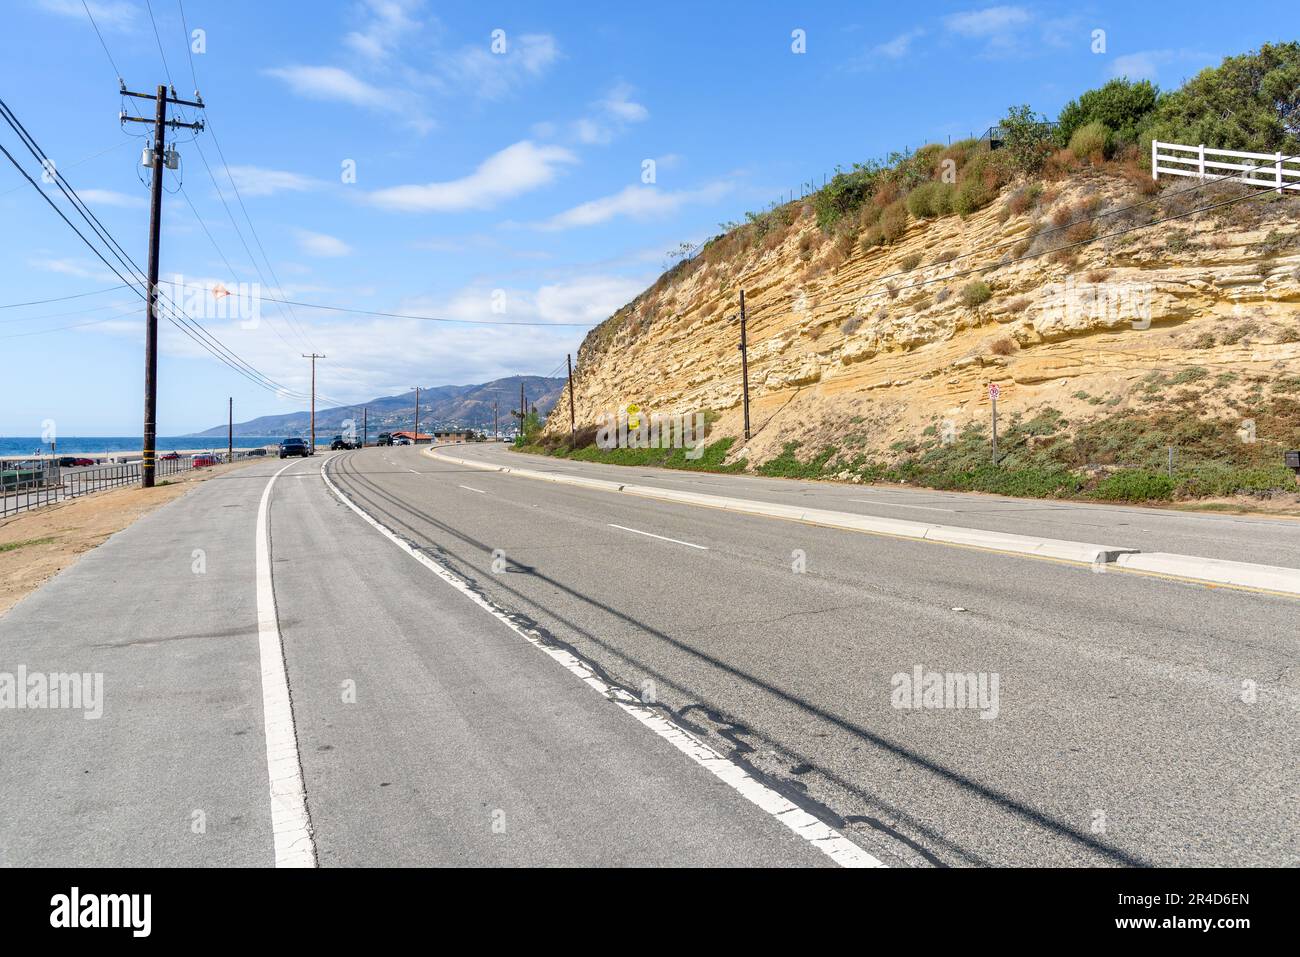 Curve along a coasal highway running at the foot of a cliff on a clear autumn day Stock Photo